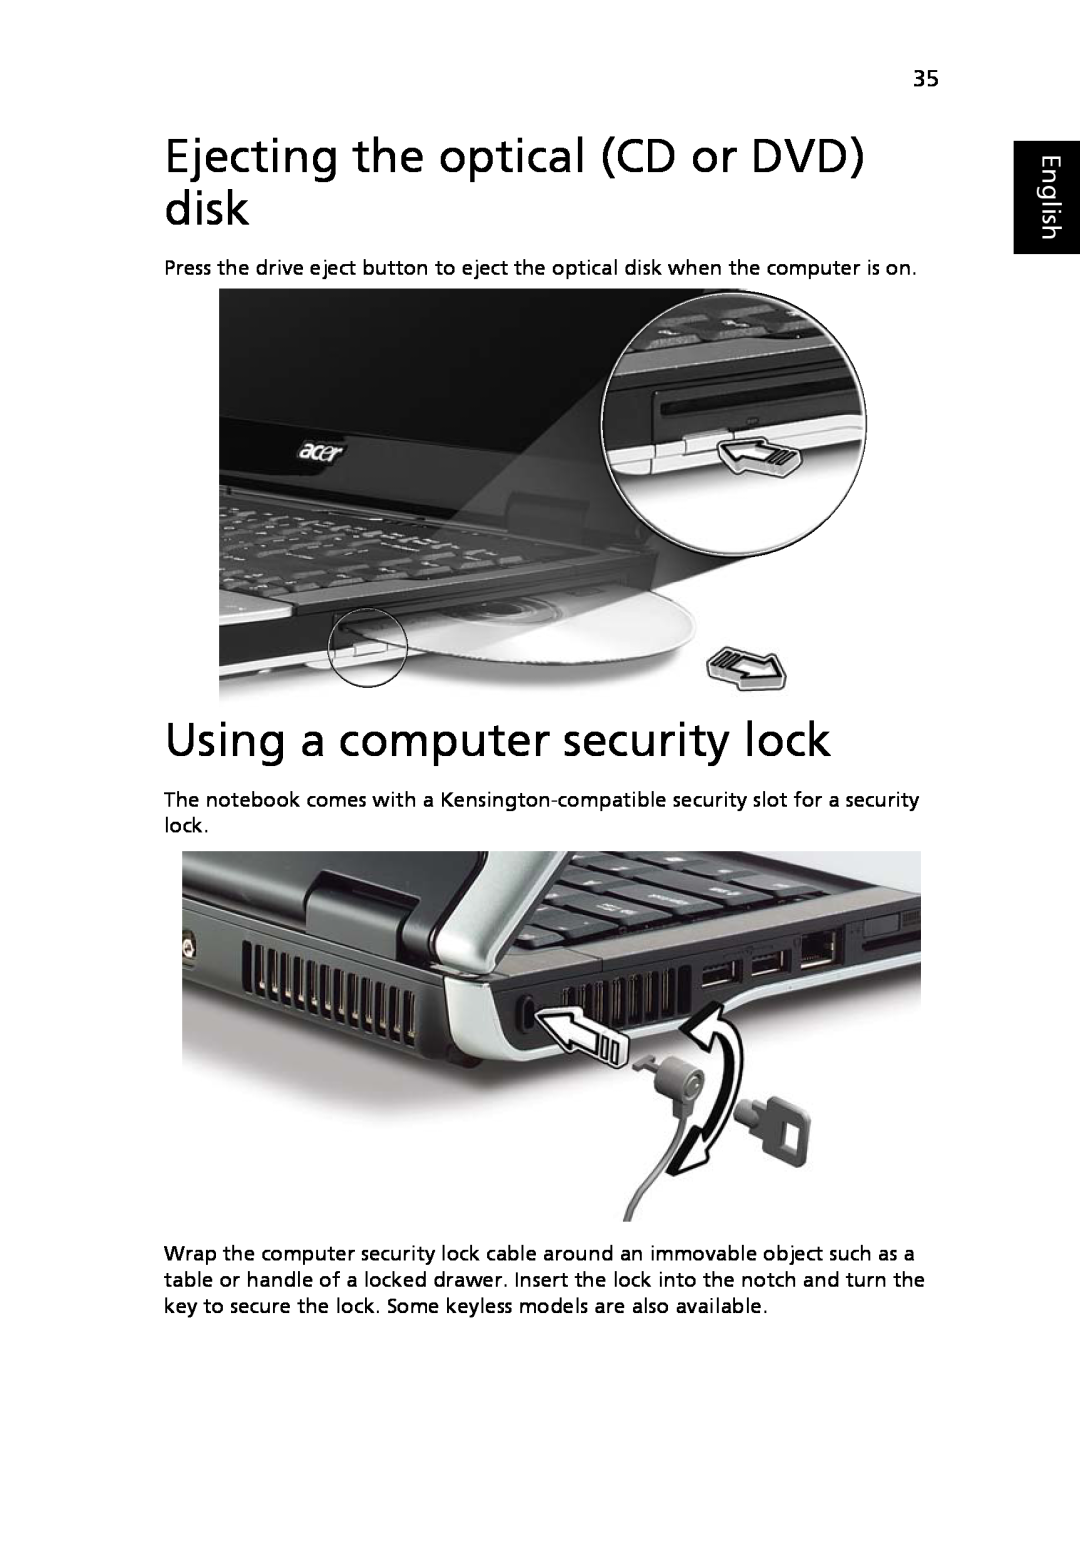 Acer 9120 manual Ejecting the optical CD or DVD disk, Using a computer security lock, English 